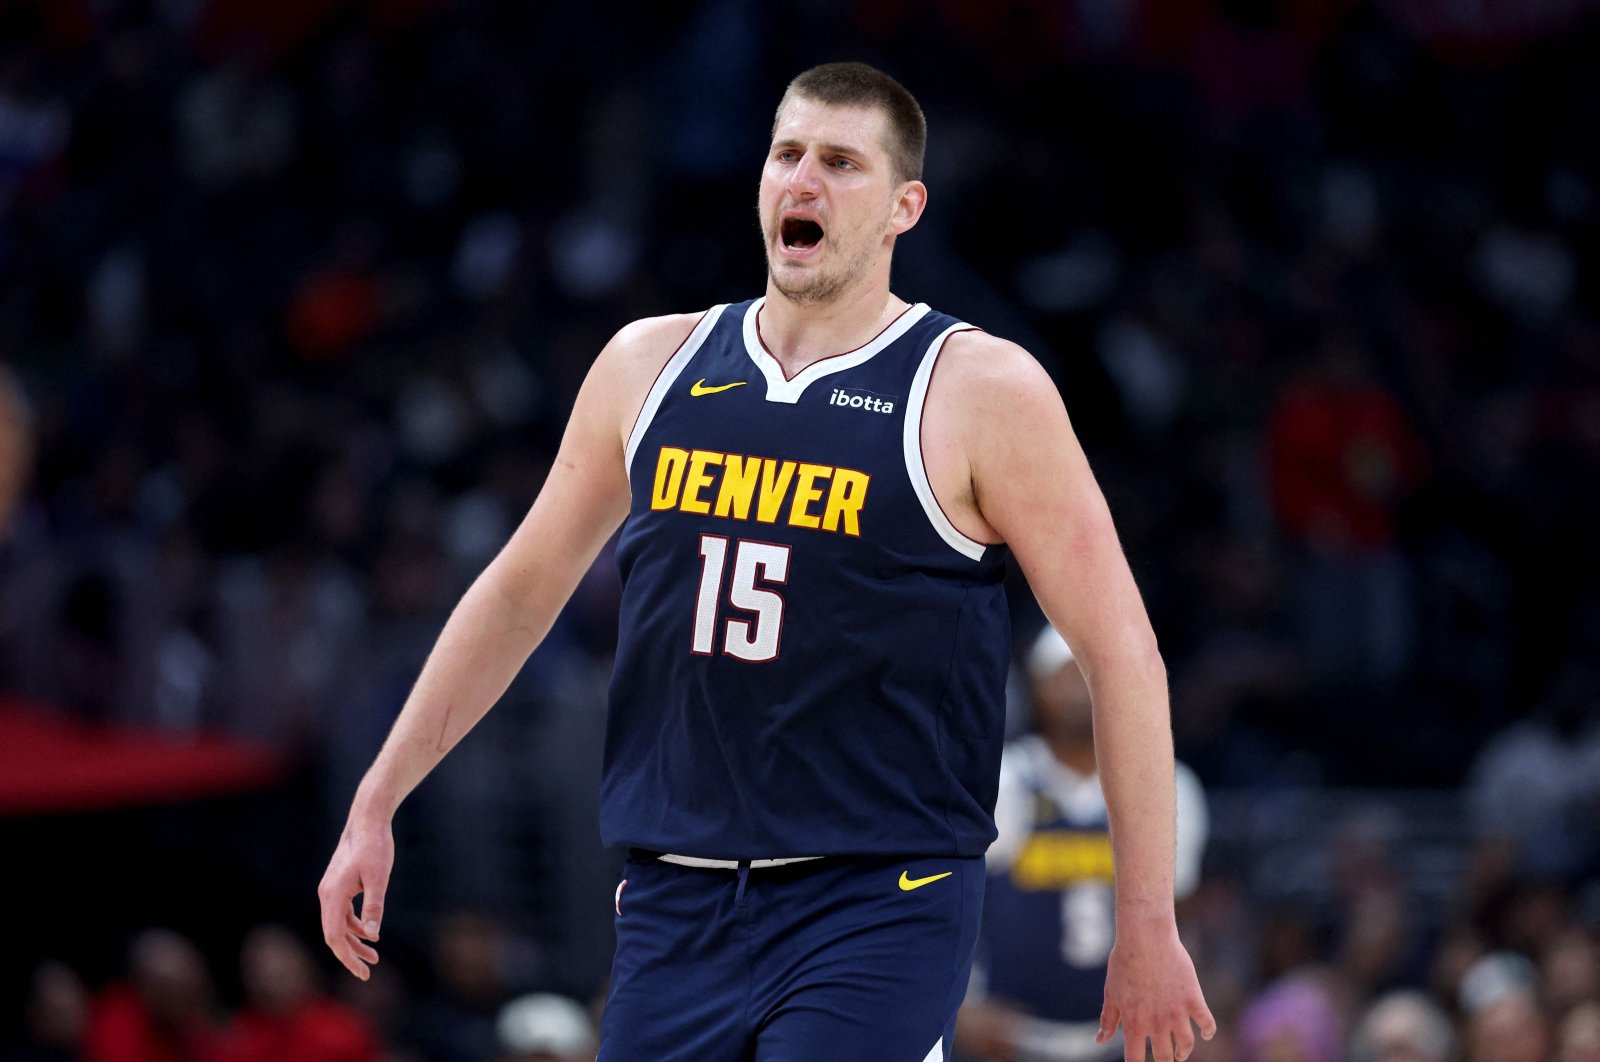 NBA probes Jokic’s brother’s punching incident after Nuggets’ win